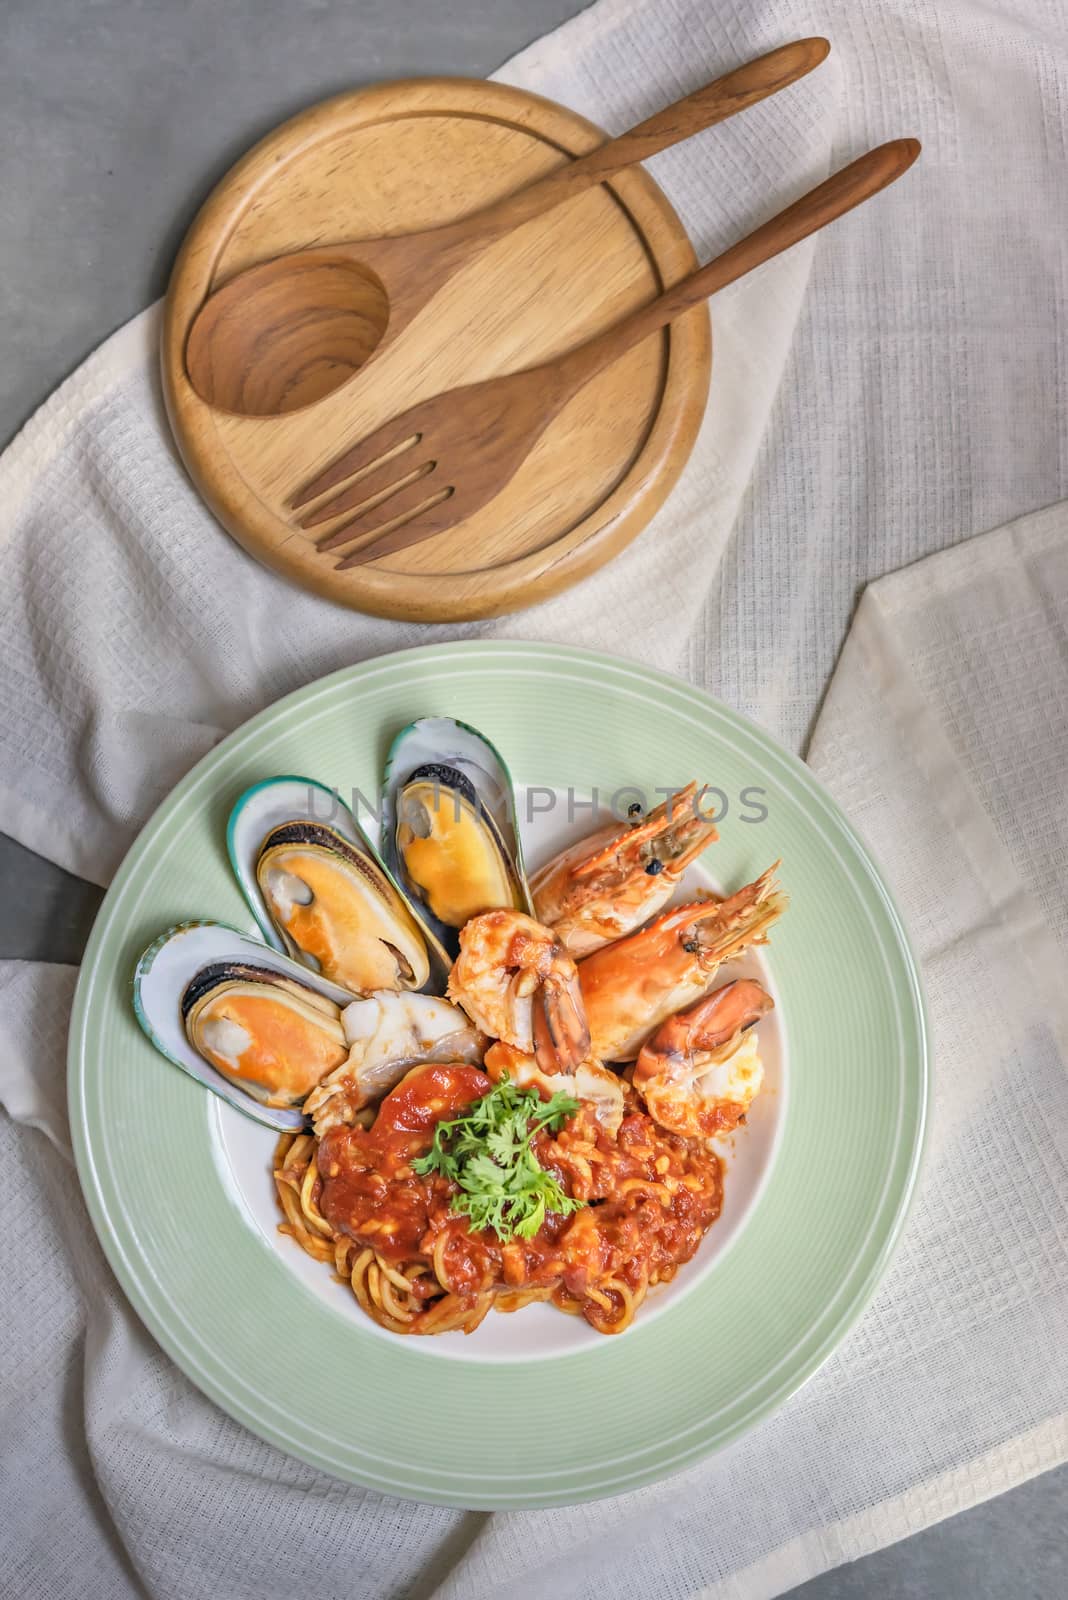 Spaghetti with seafood in tomato sauce on a plate